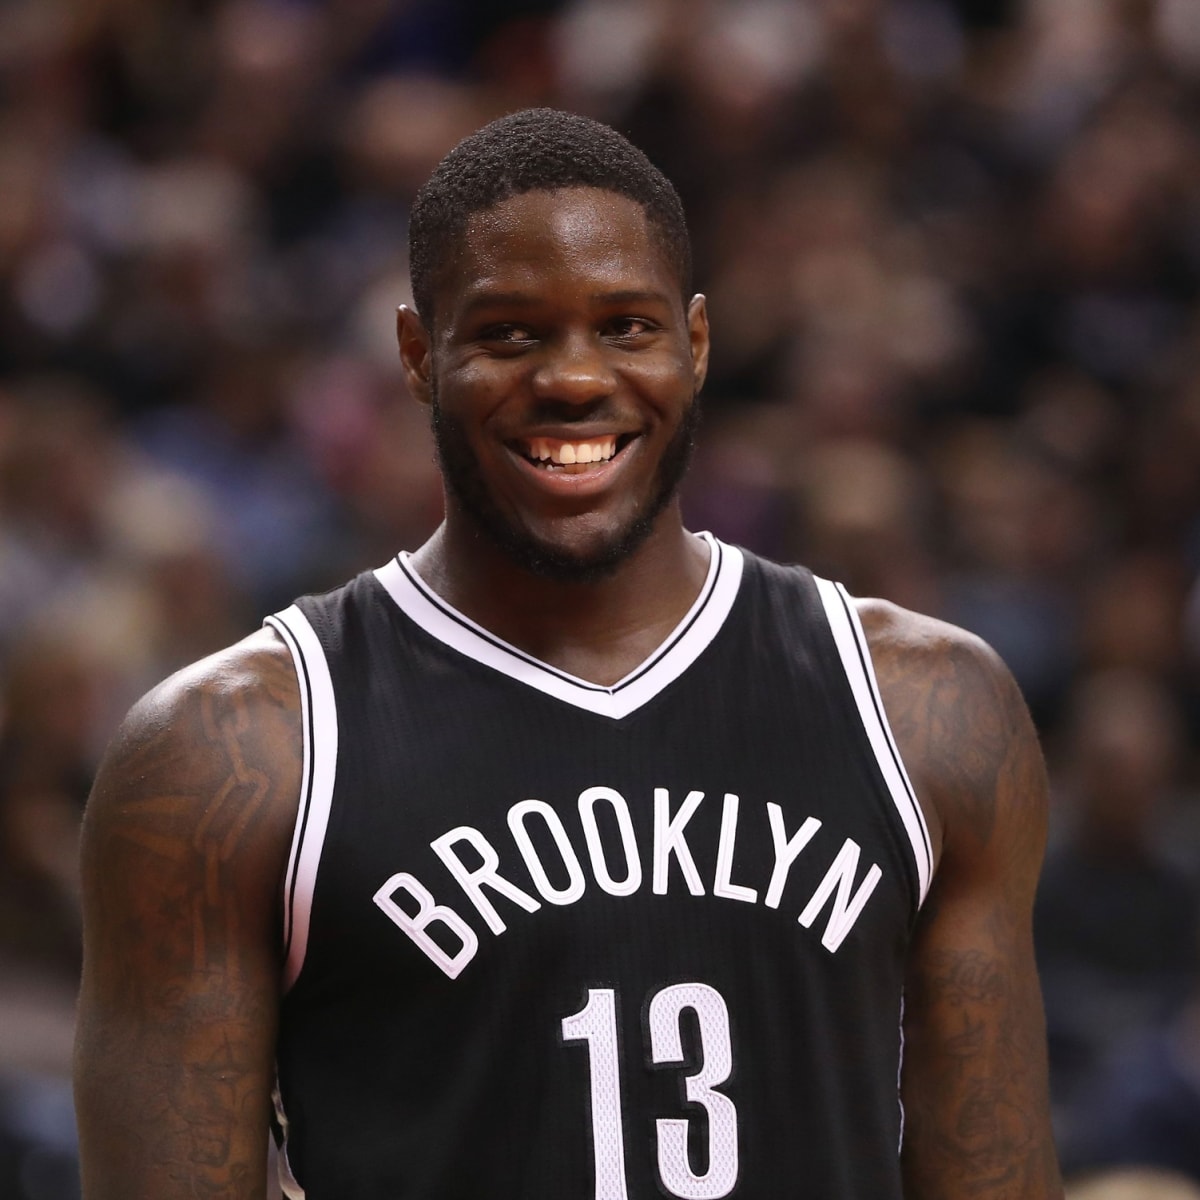 Nets waive Anthony Bennett, former No. 1 overall pick - Newsday